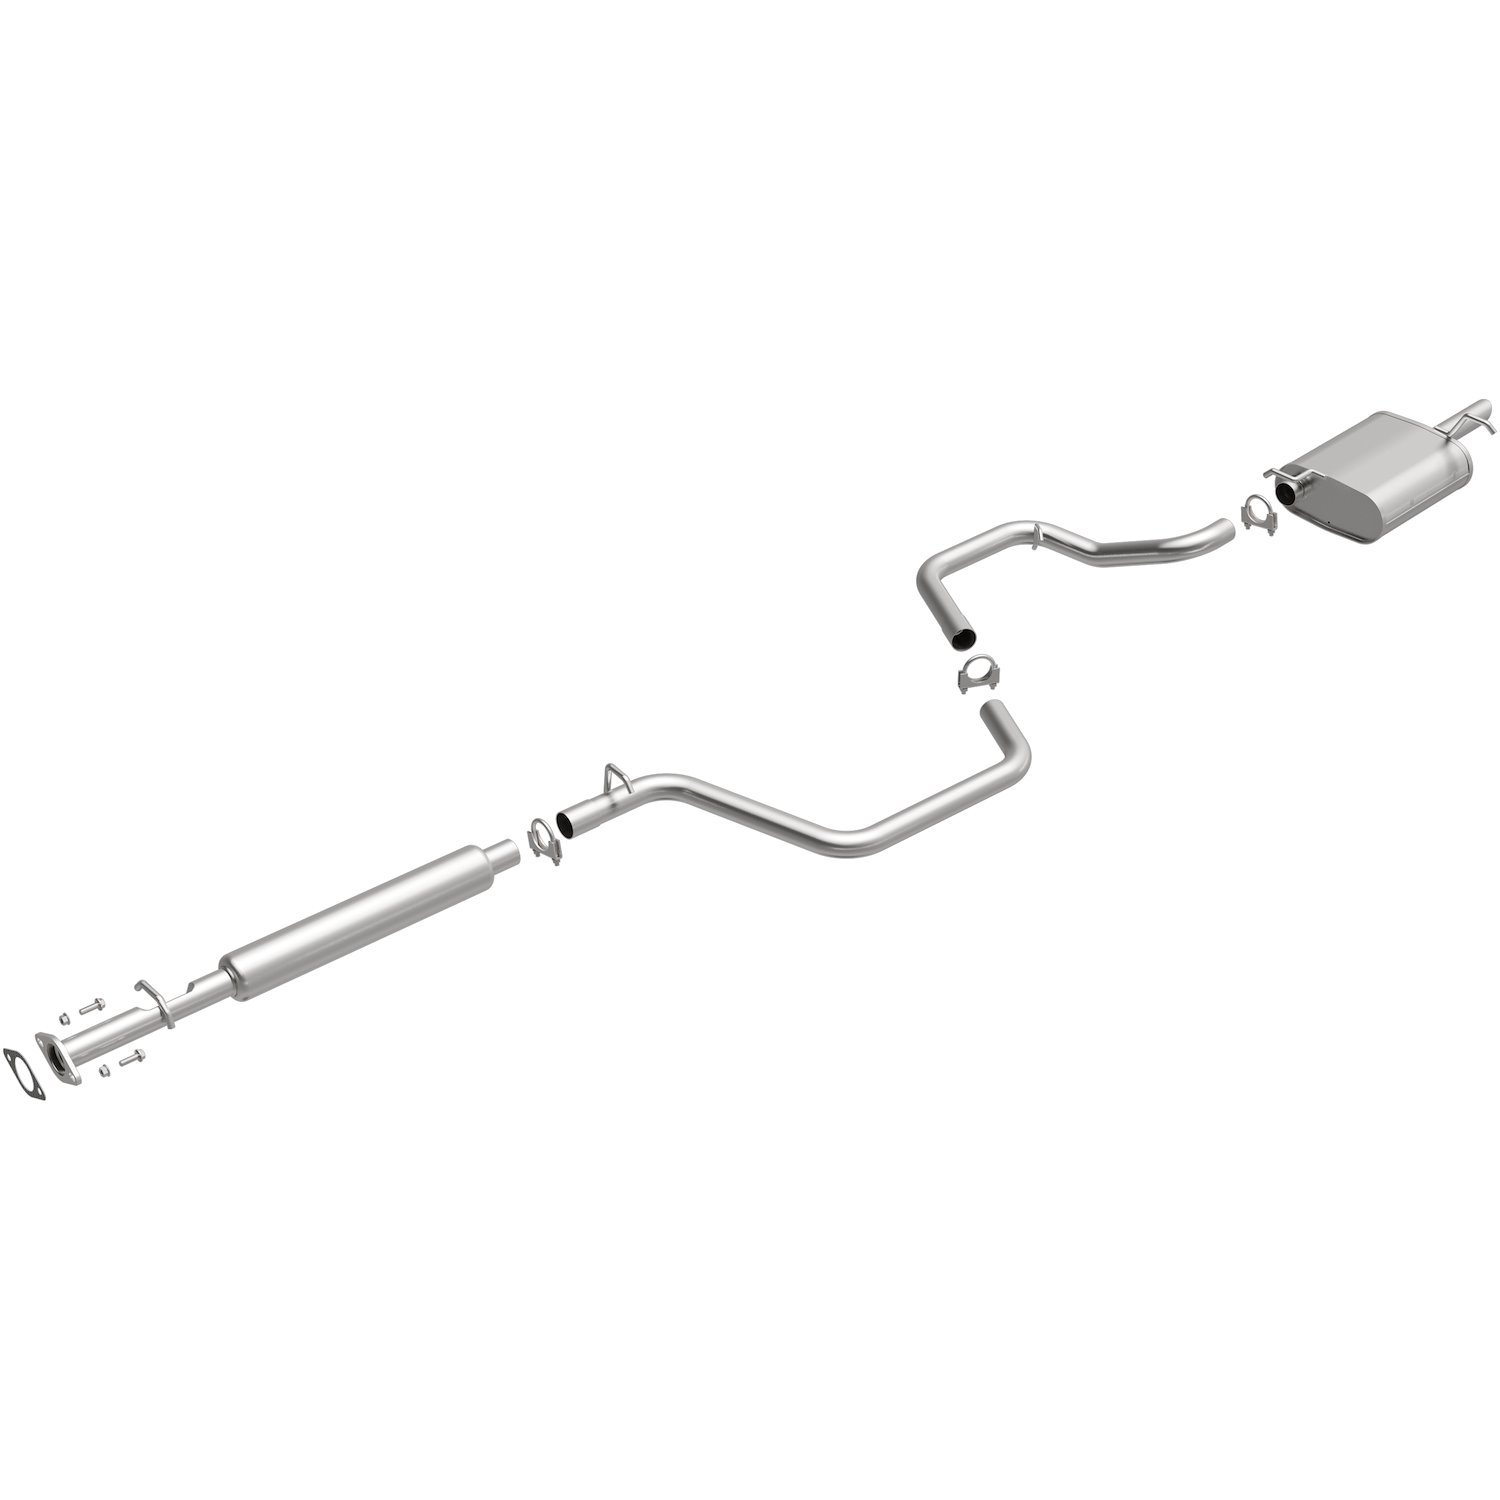 Direct-Fit Exhaust Kit, 2004-2008 Chevy Malibu